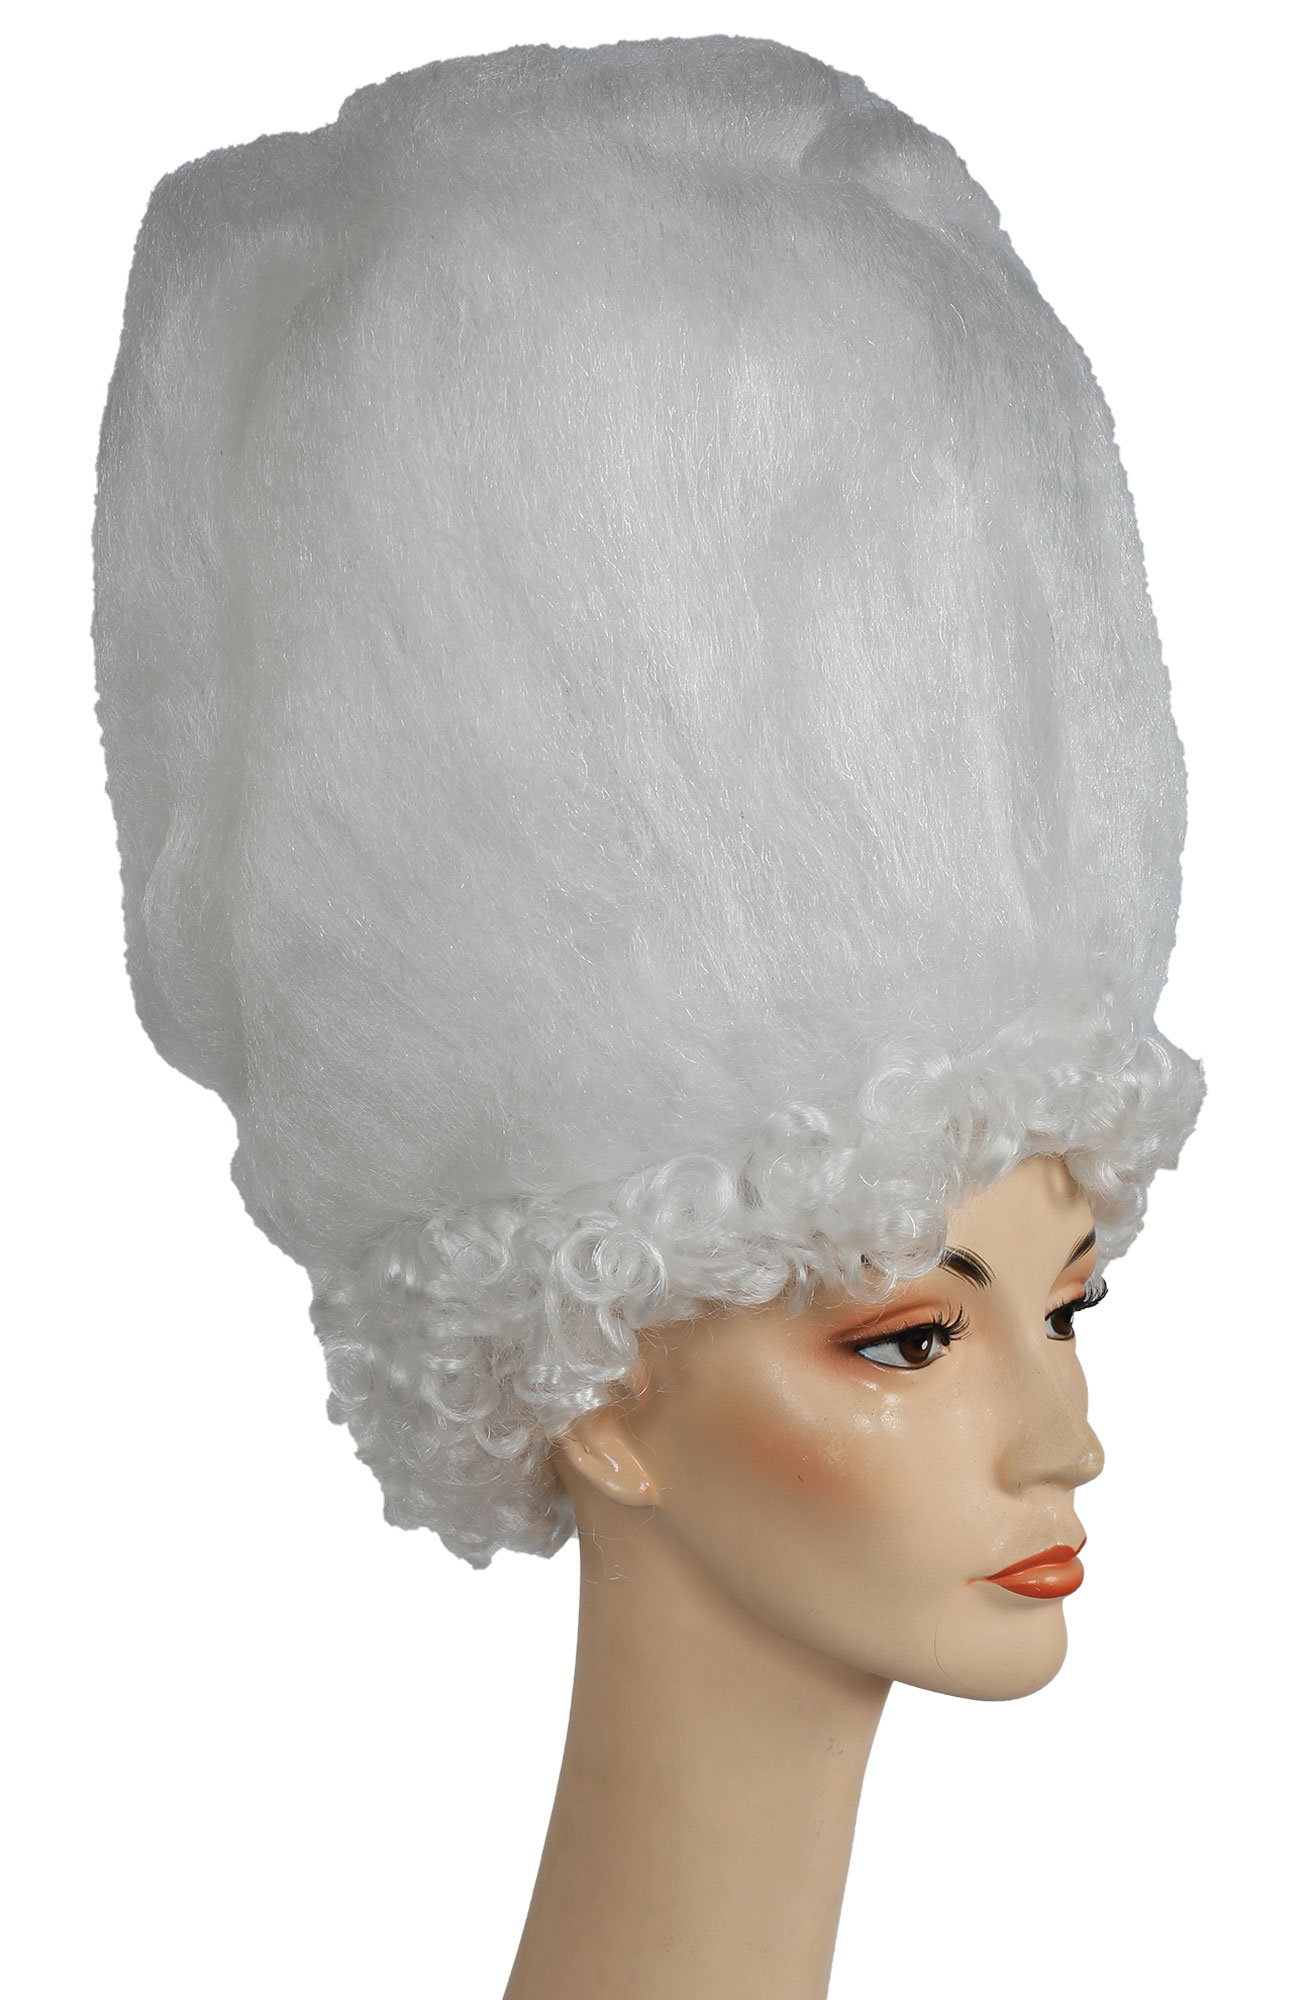 Morris Costumes Lacey Wigs LW20WT Monster Bride Deluxe Wig - White